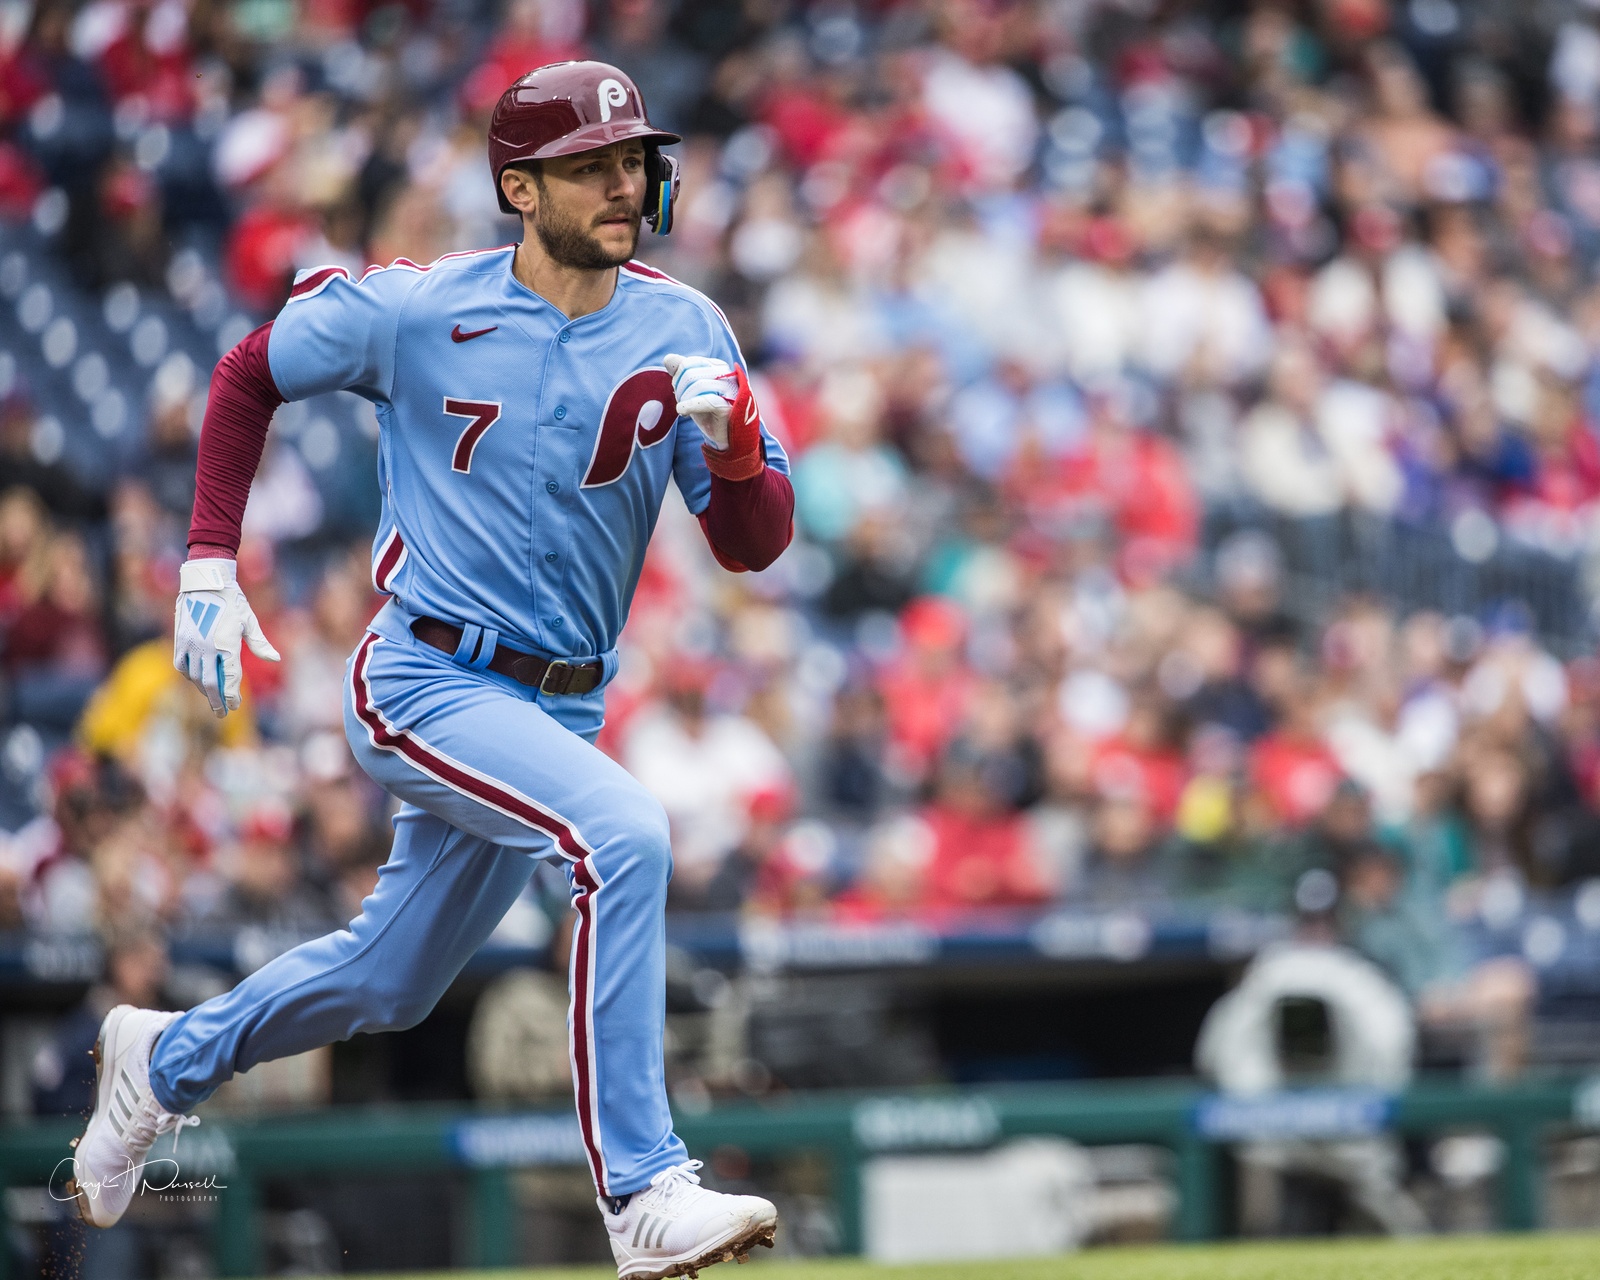 Watch: Trea Turner makes Jeter-like play to get first out  Phillies Nation  - Your source for Philadelphia Phillies news, opinion, history, rumors,  events, and other fun stuff.